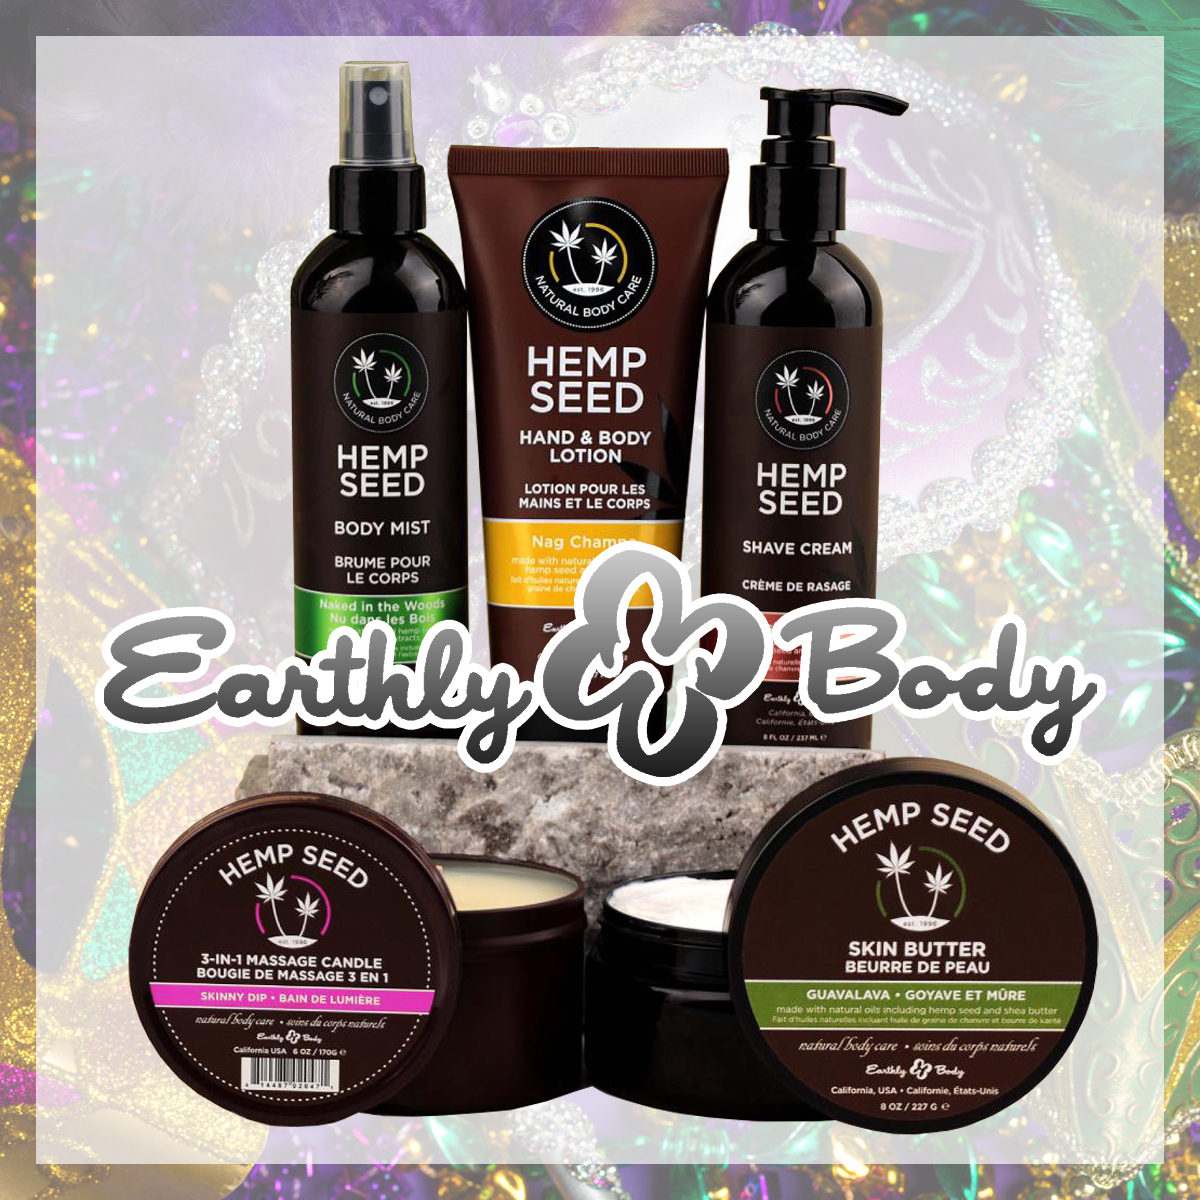 March 22nd-28th! - ALL #earthlybody products will be on SALE! 15% OFF! yay!
#noda #charlottenc #cltnc #queencity #uncc #cpcc #charlottepride #smallbusiness #charlottebusiness #clt